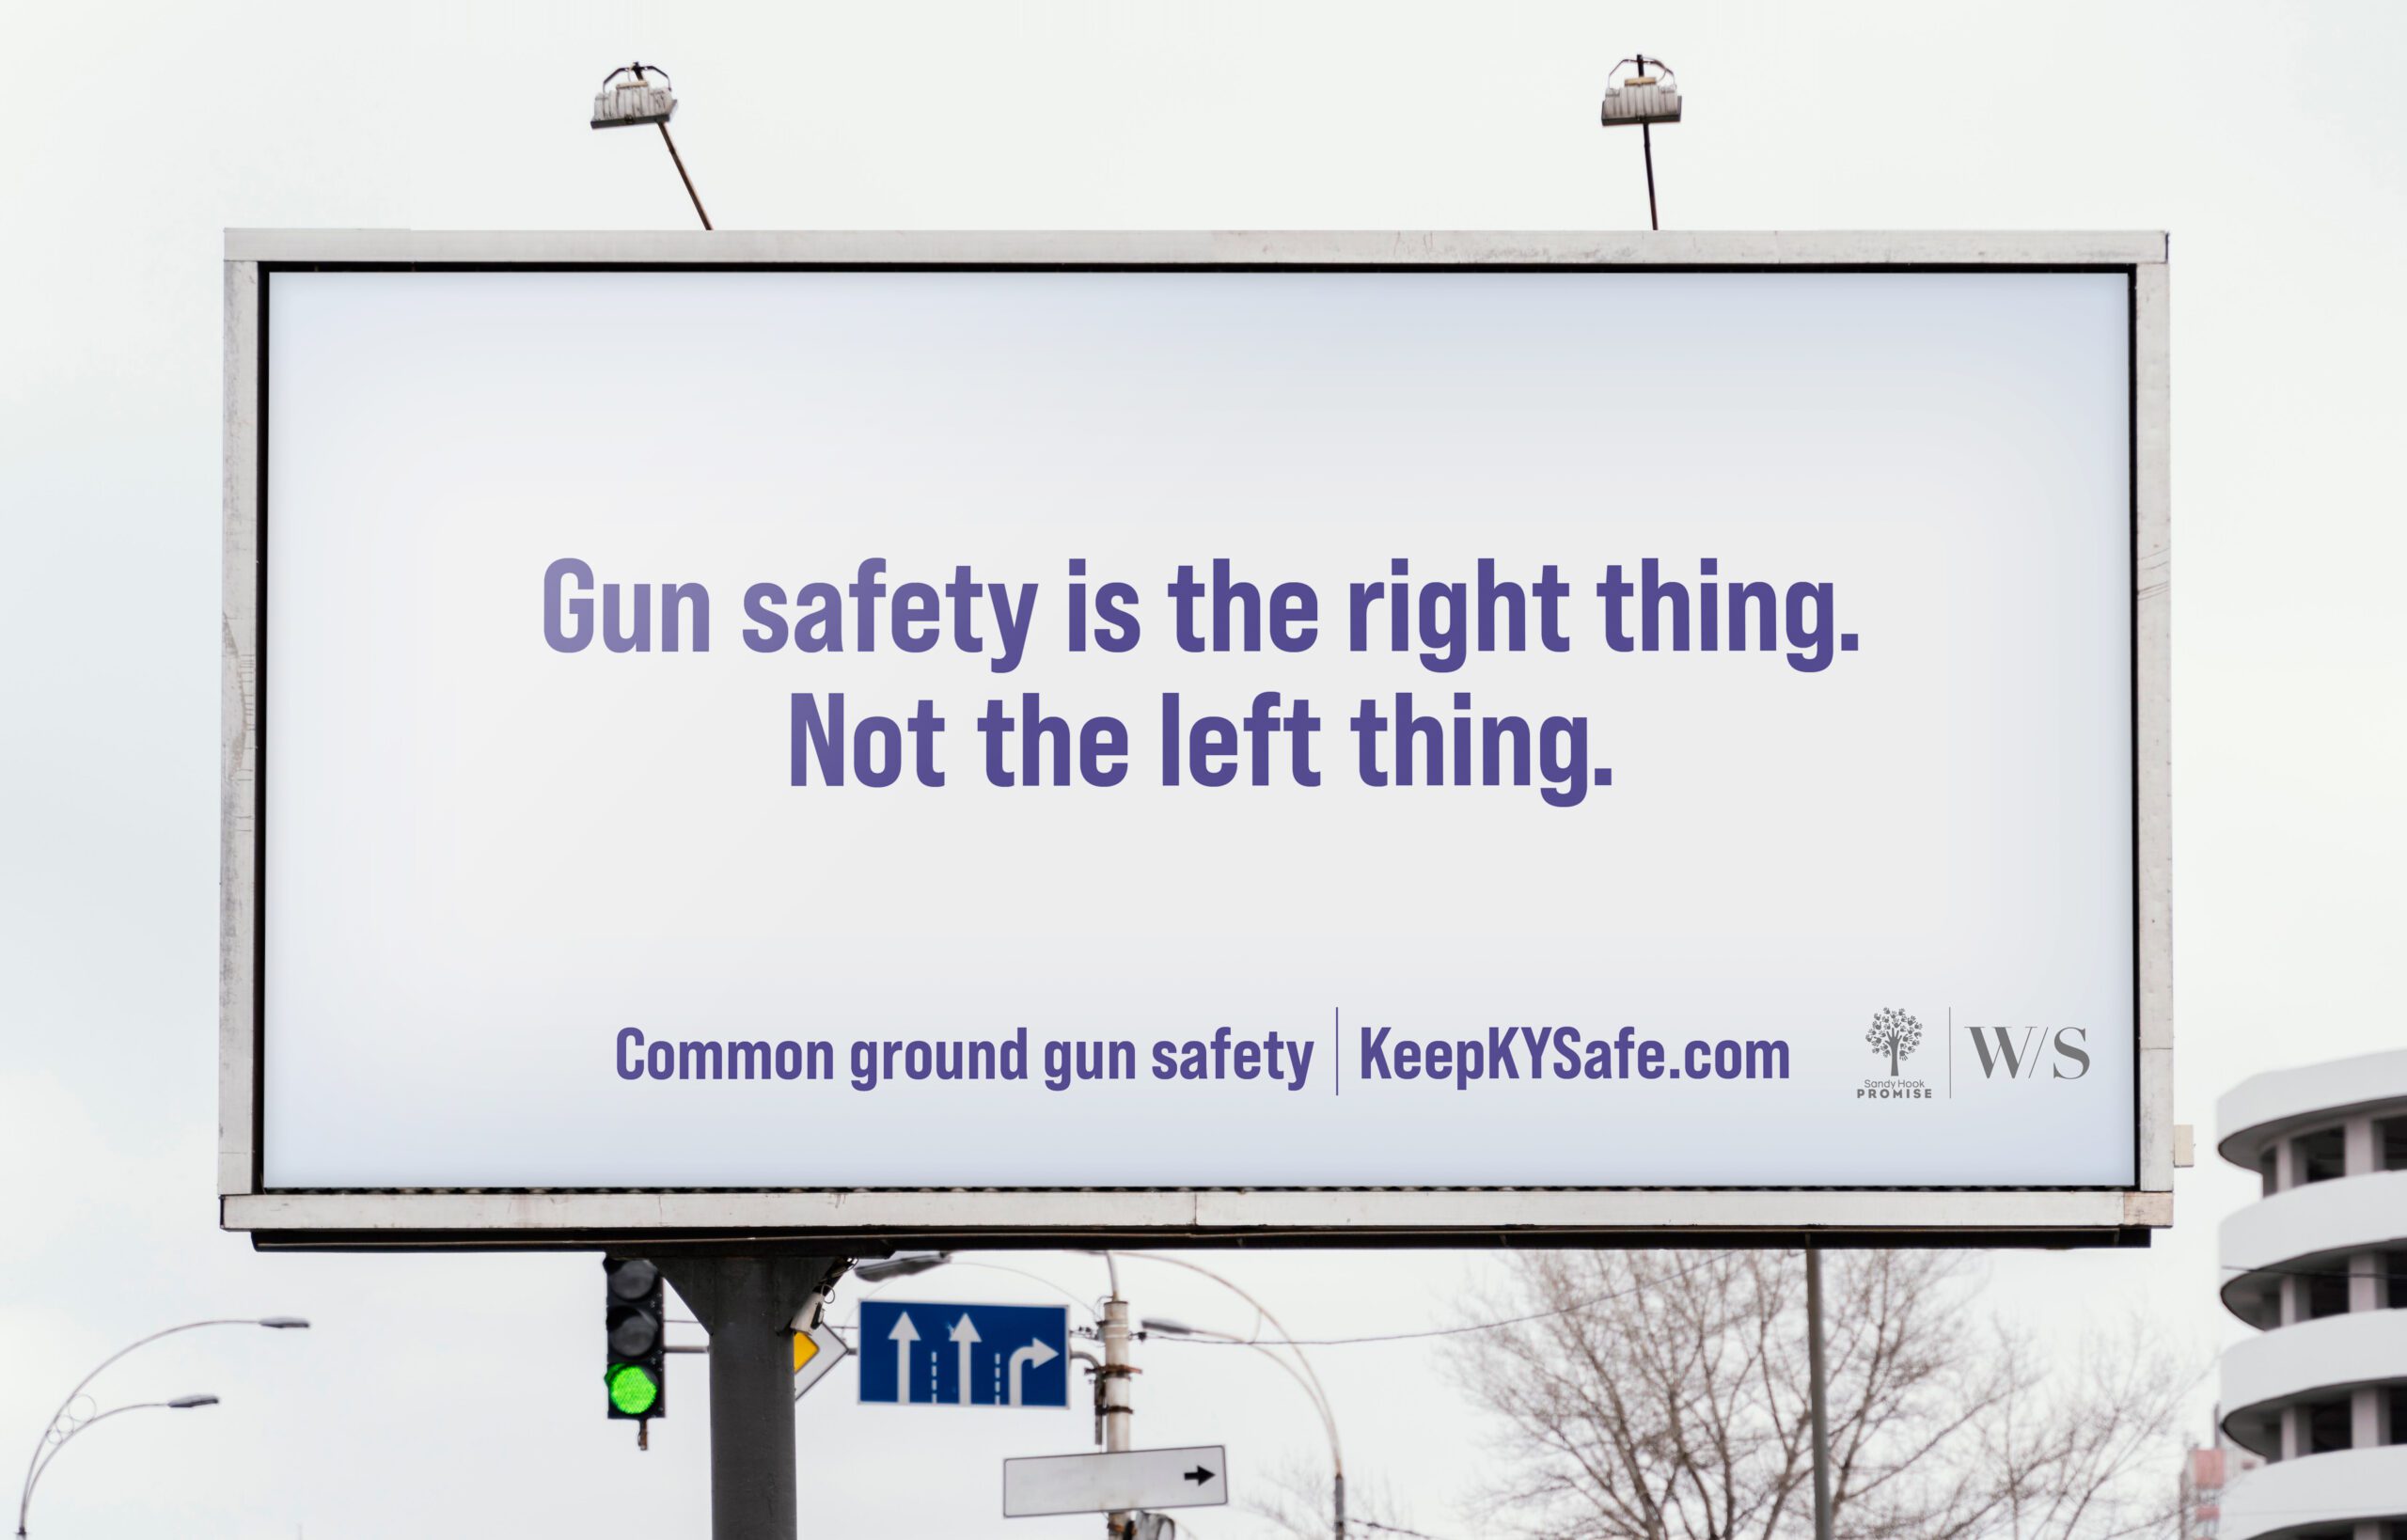 Gun safety is the right thing outdoor board